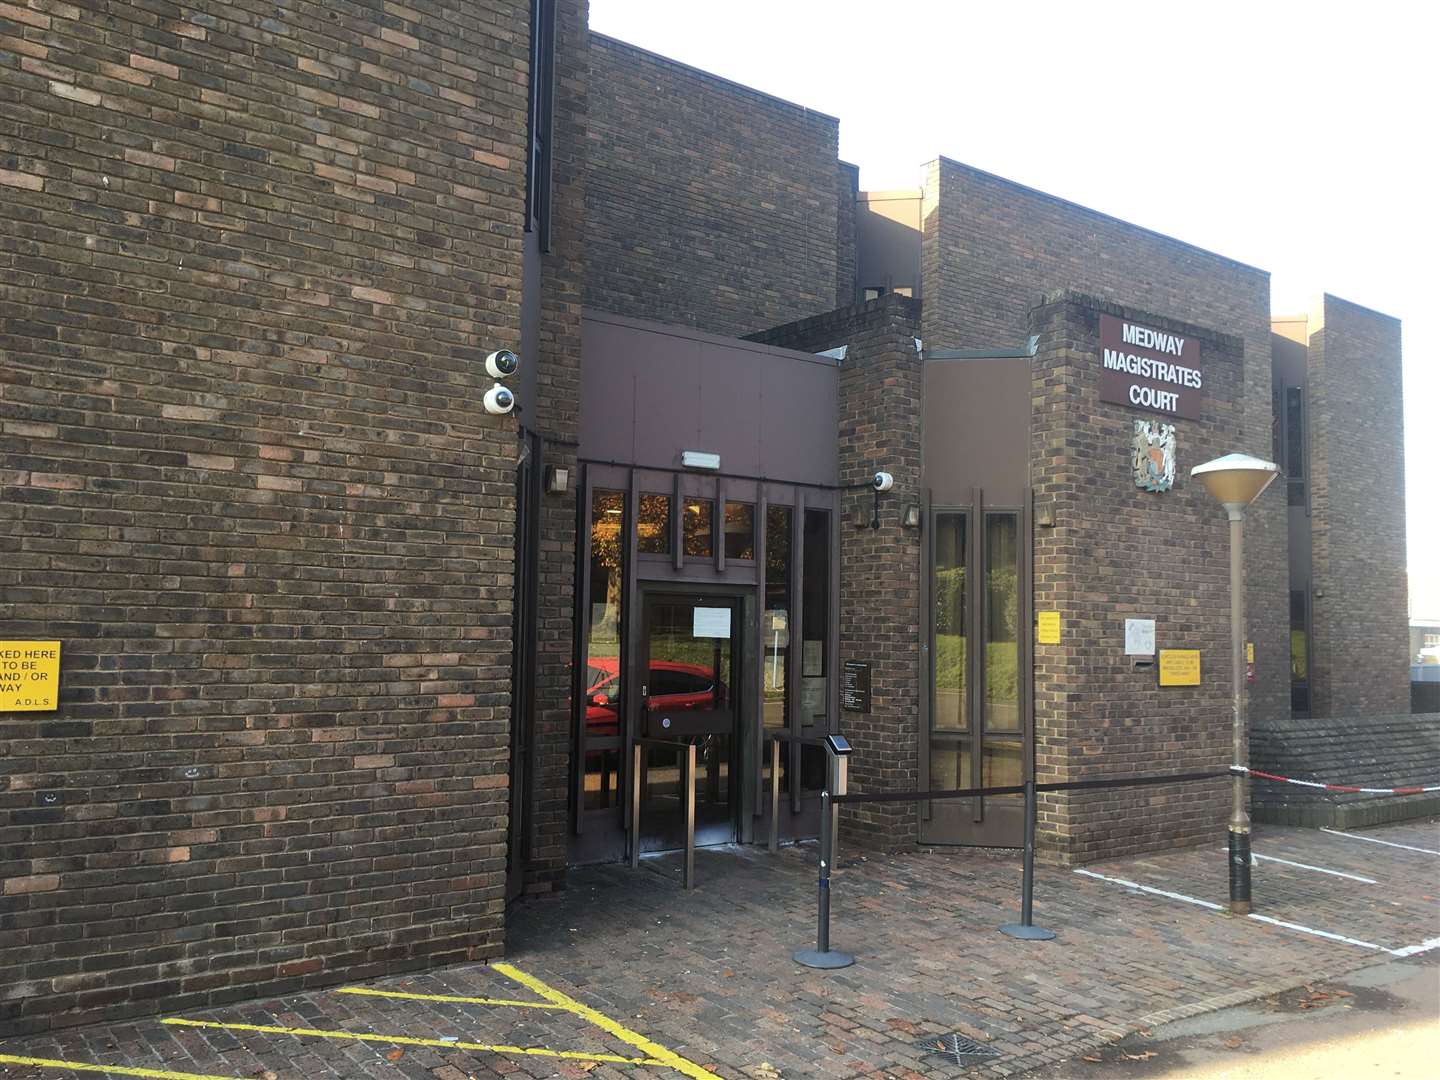 Four men appeared at Medway Magistrates' Court today